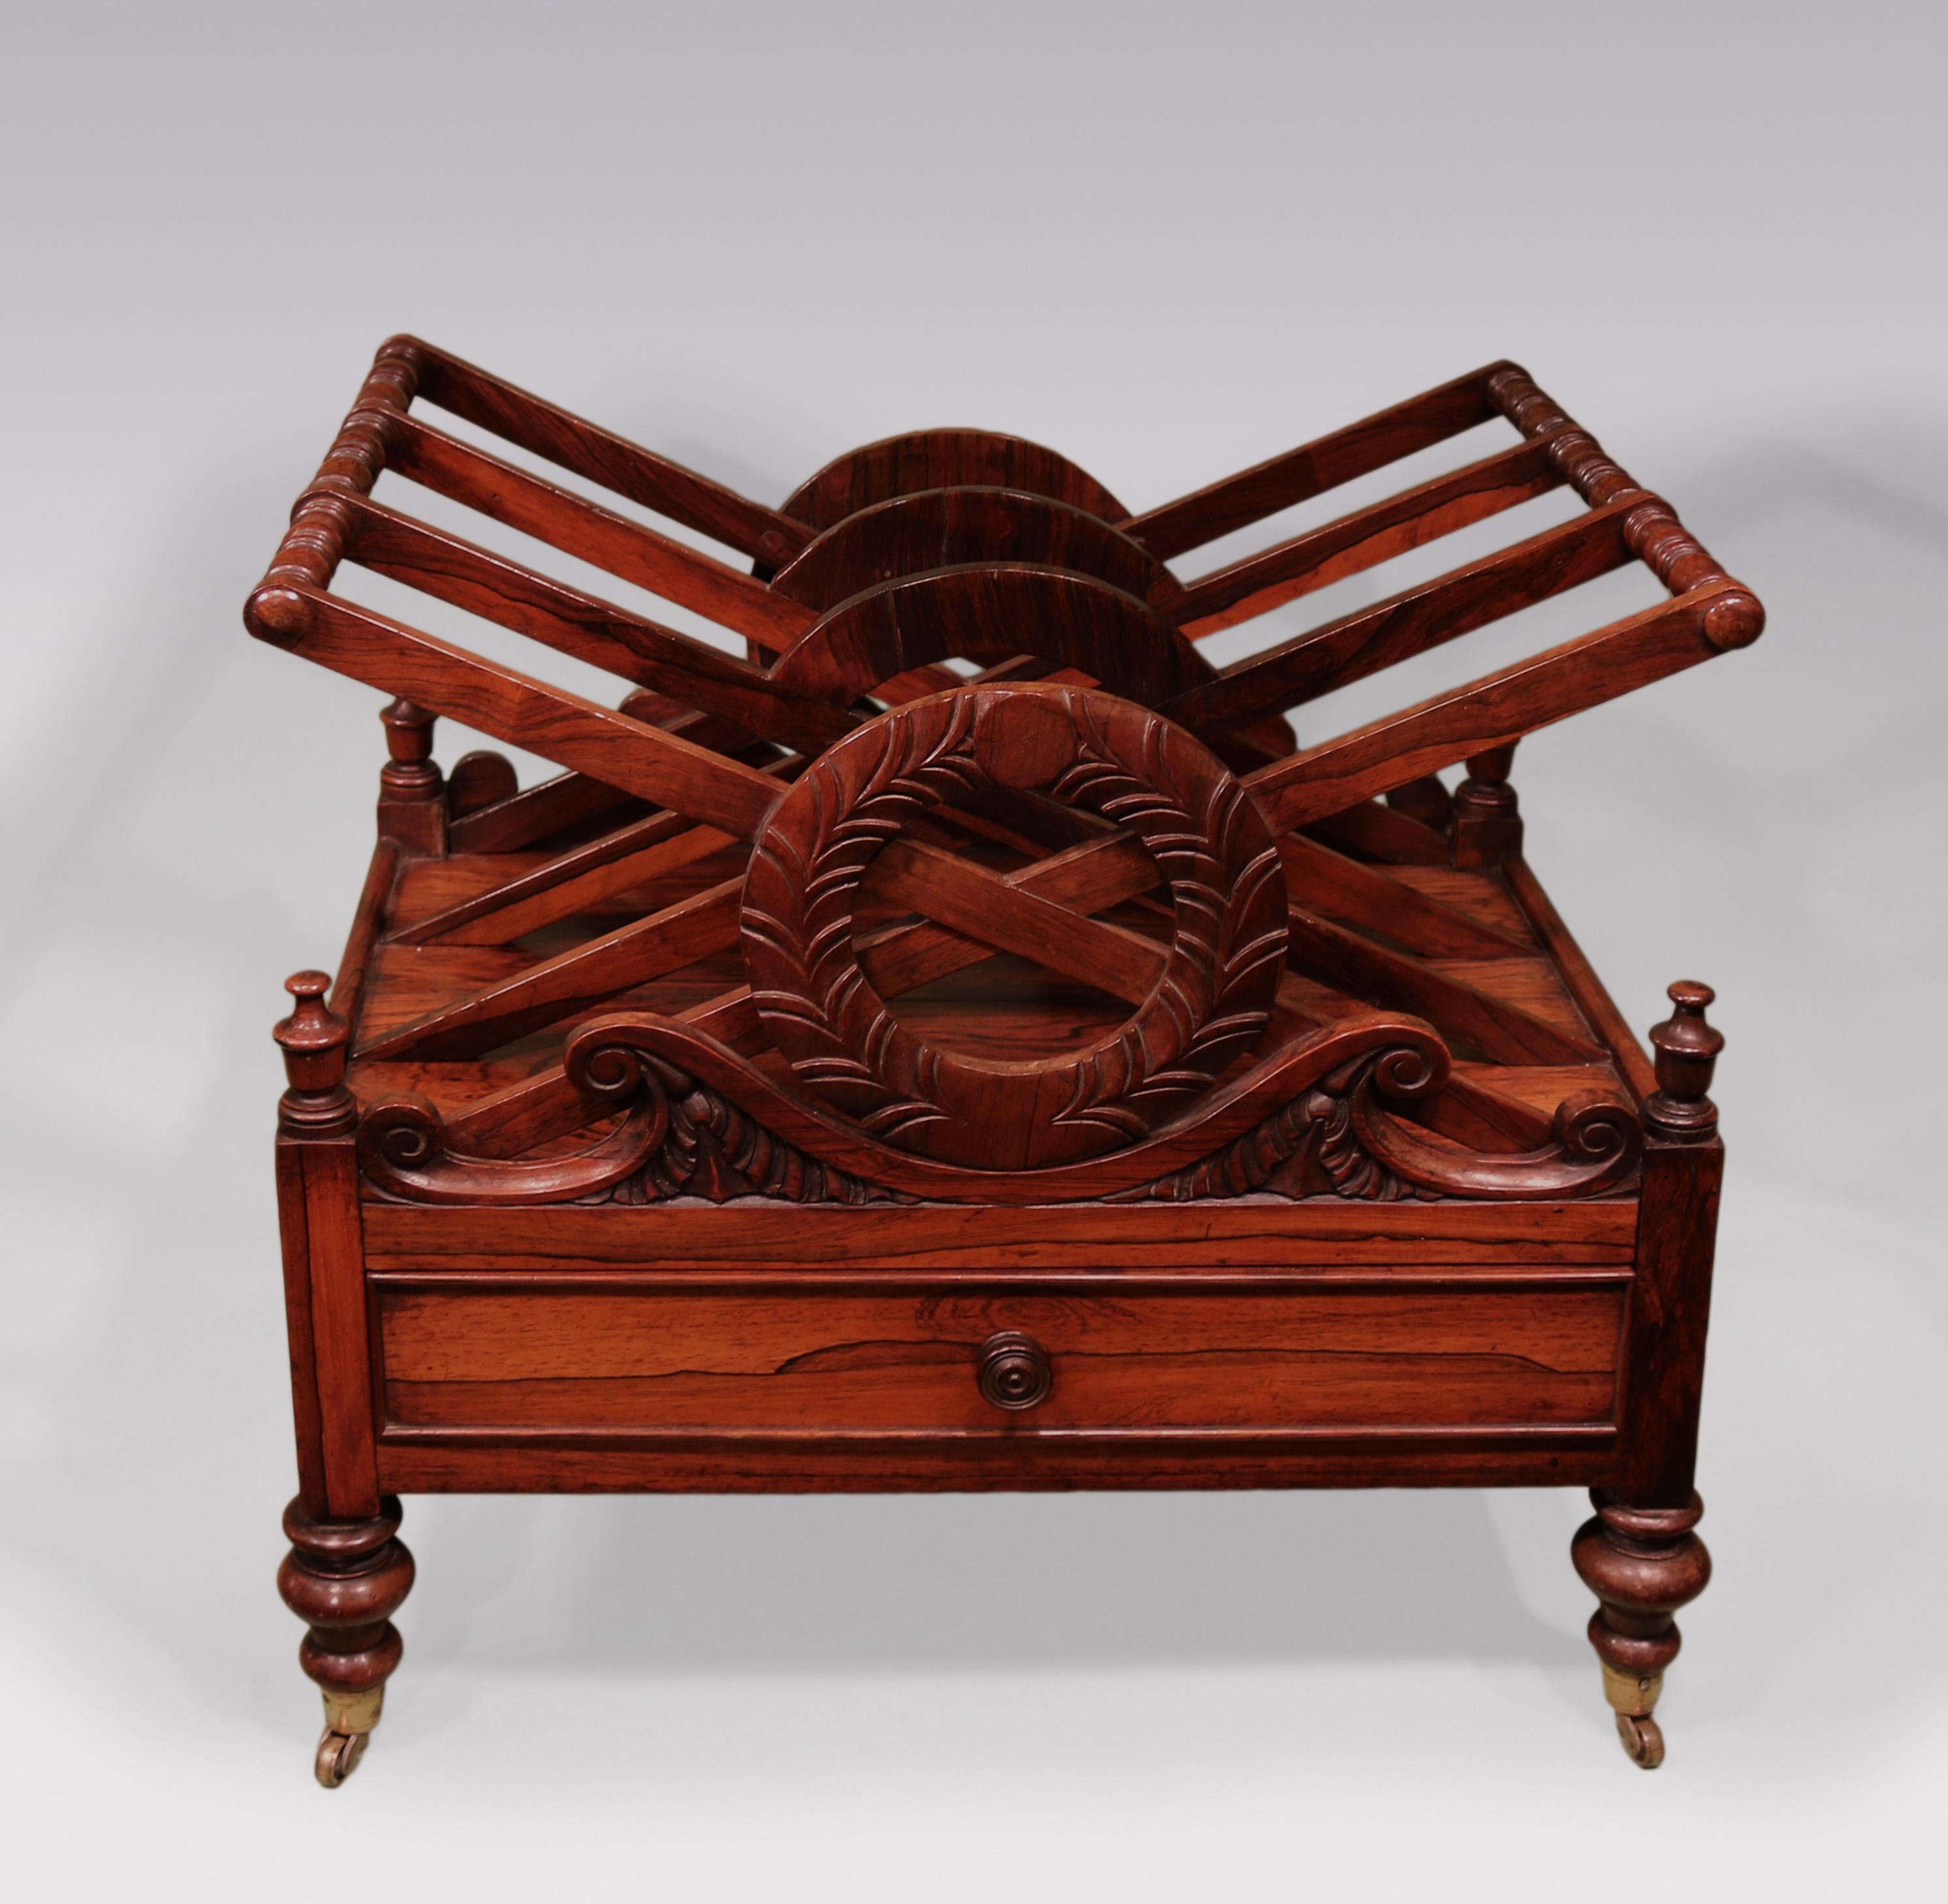 A William IV rosewood 3-section X framed Canterbury having carved & scrolled wreath front & back and frieze drawer, supported on turned legs ending on original brass castors.